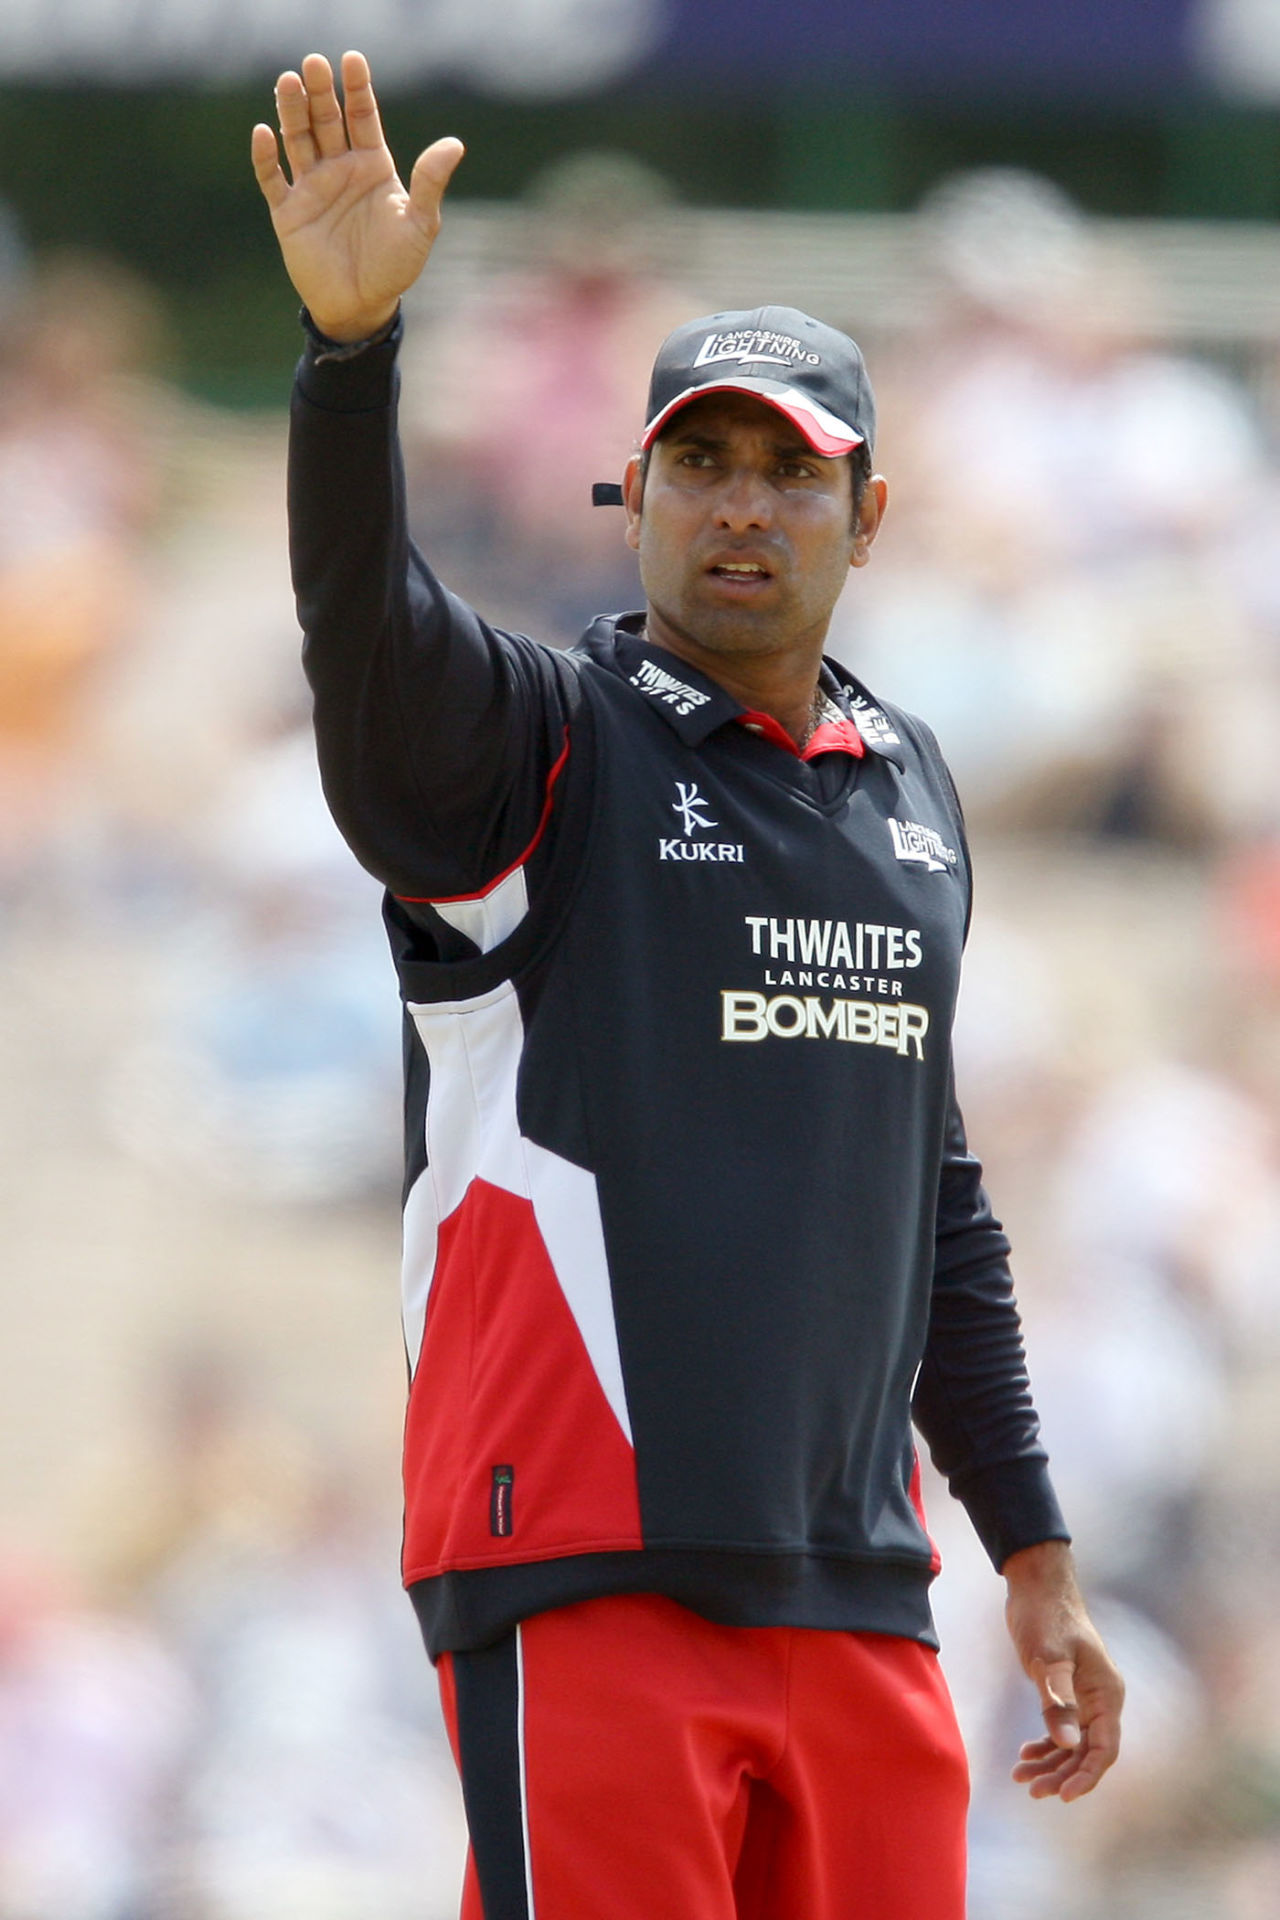 VVS Laxman signals while in the field, Lancashire v Hampshire, Friends Provident Trophy semi-final, Old Trafford, July 5, 2009